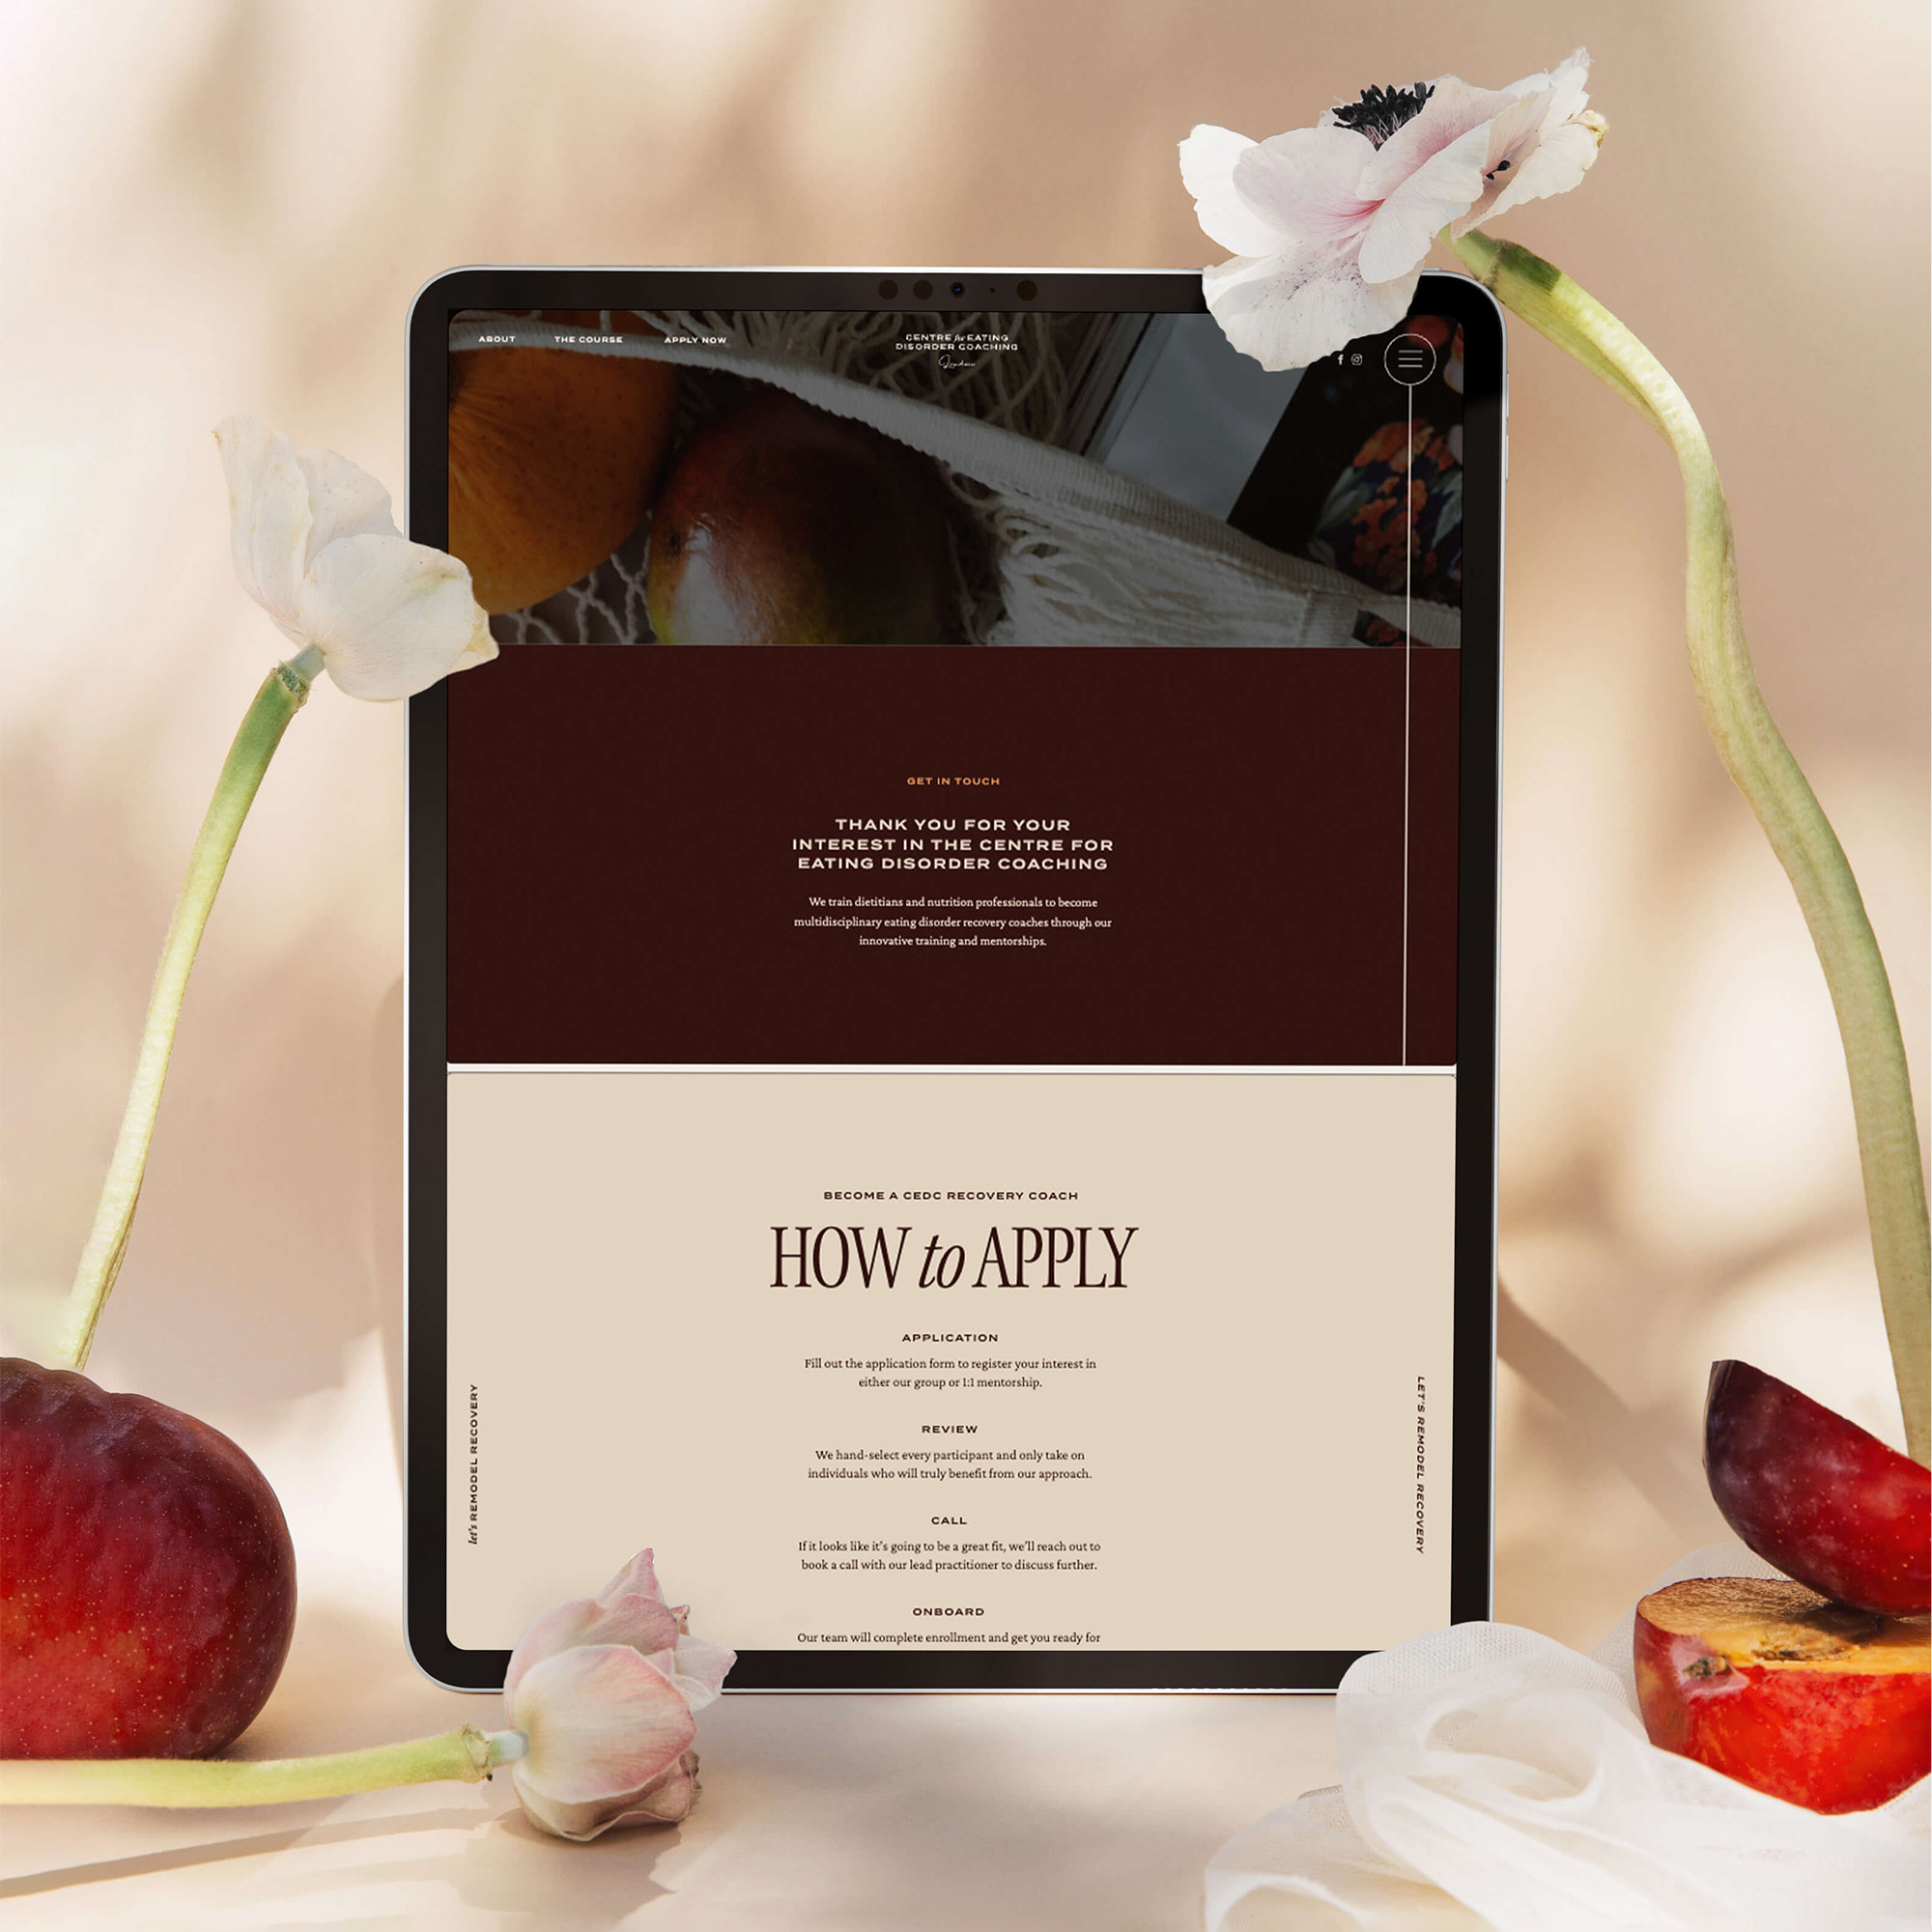 Image of an iPad open to the Centre for Eating Disorder Coaching website, surrounded by flowers and fruits.